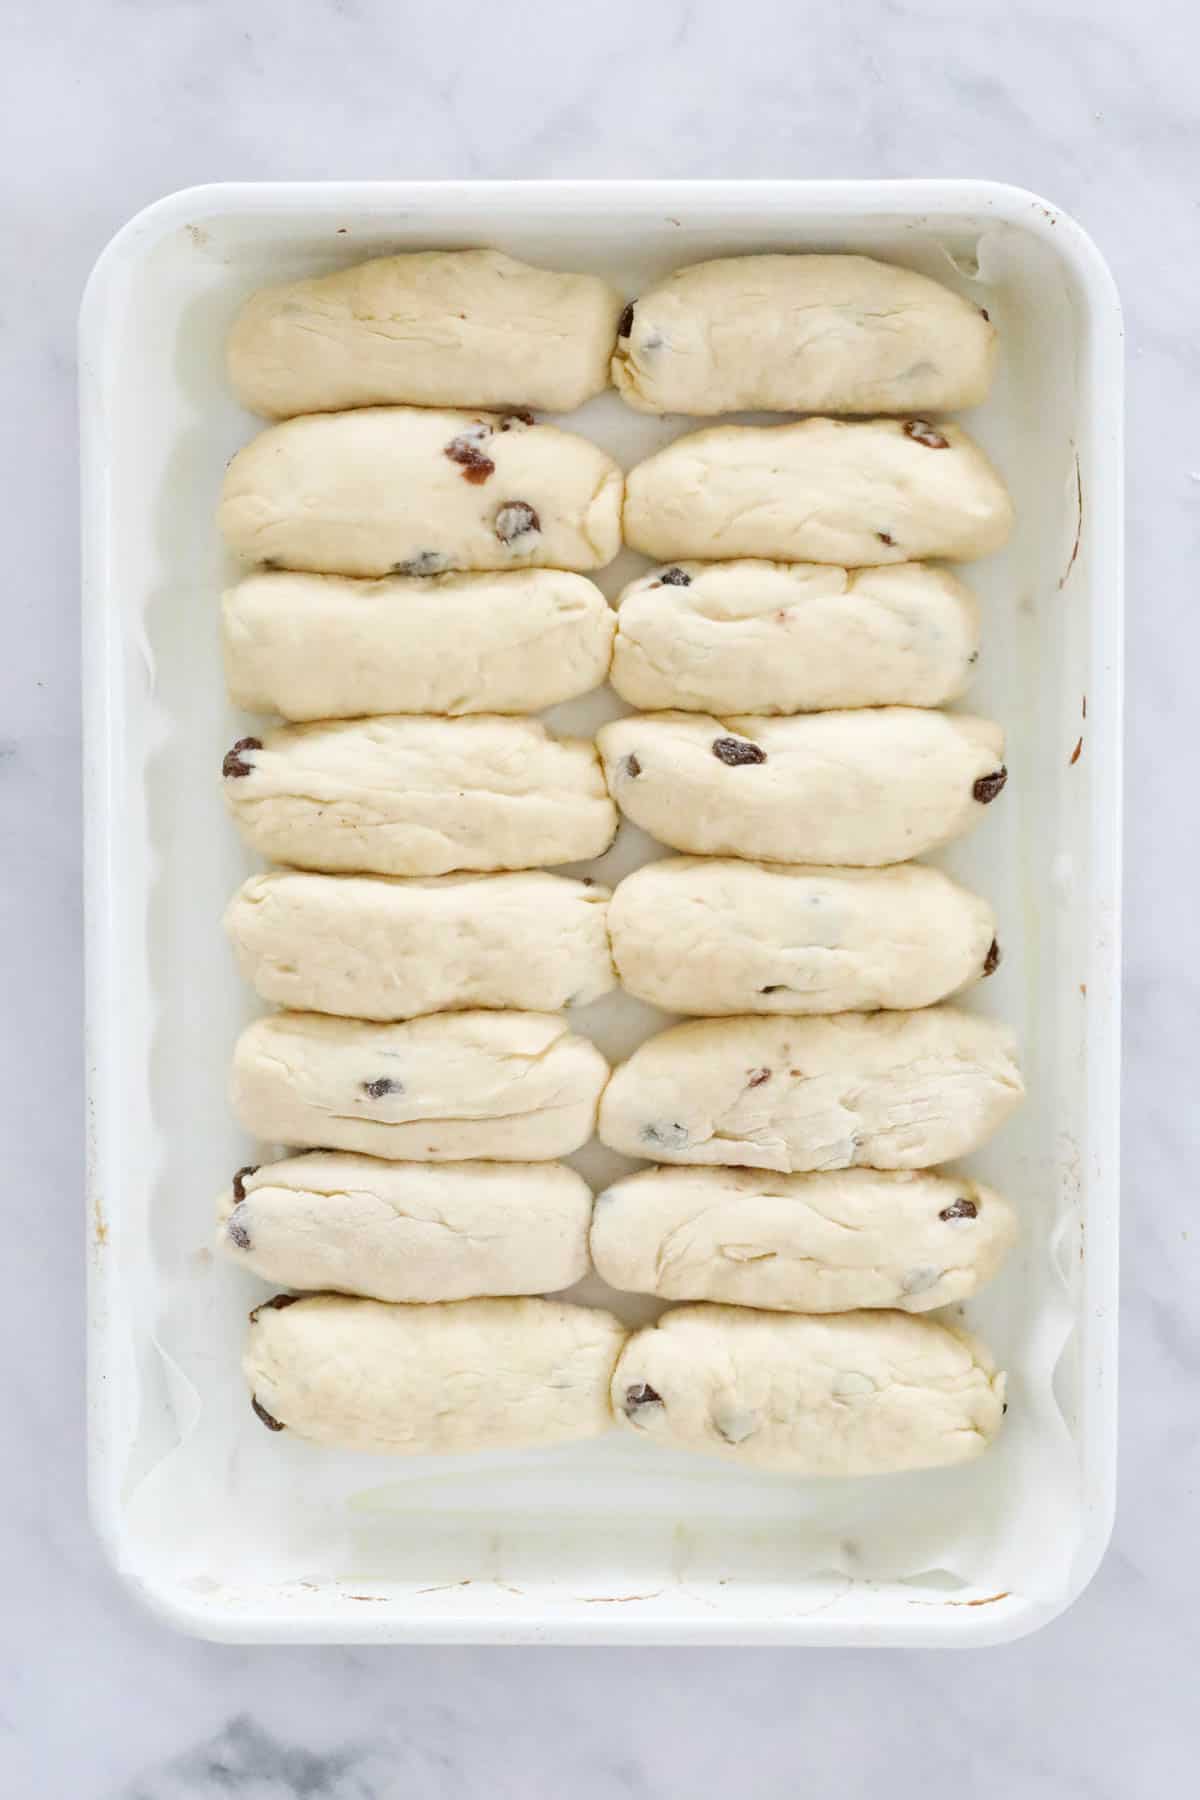 The dough shaped into finger bun shapes and placed on a baking tray.